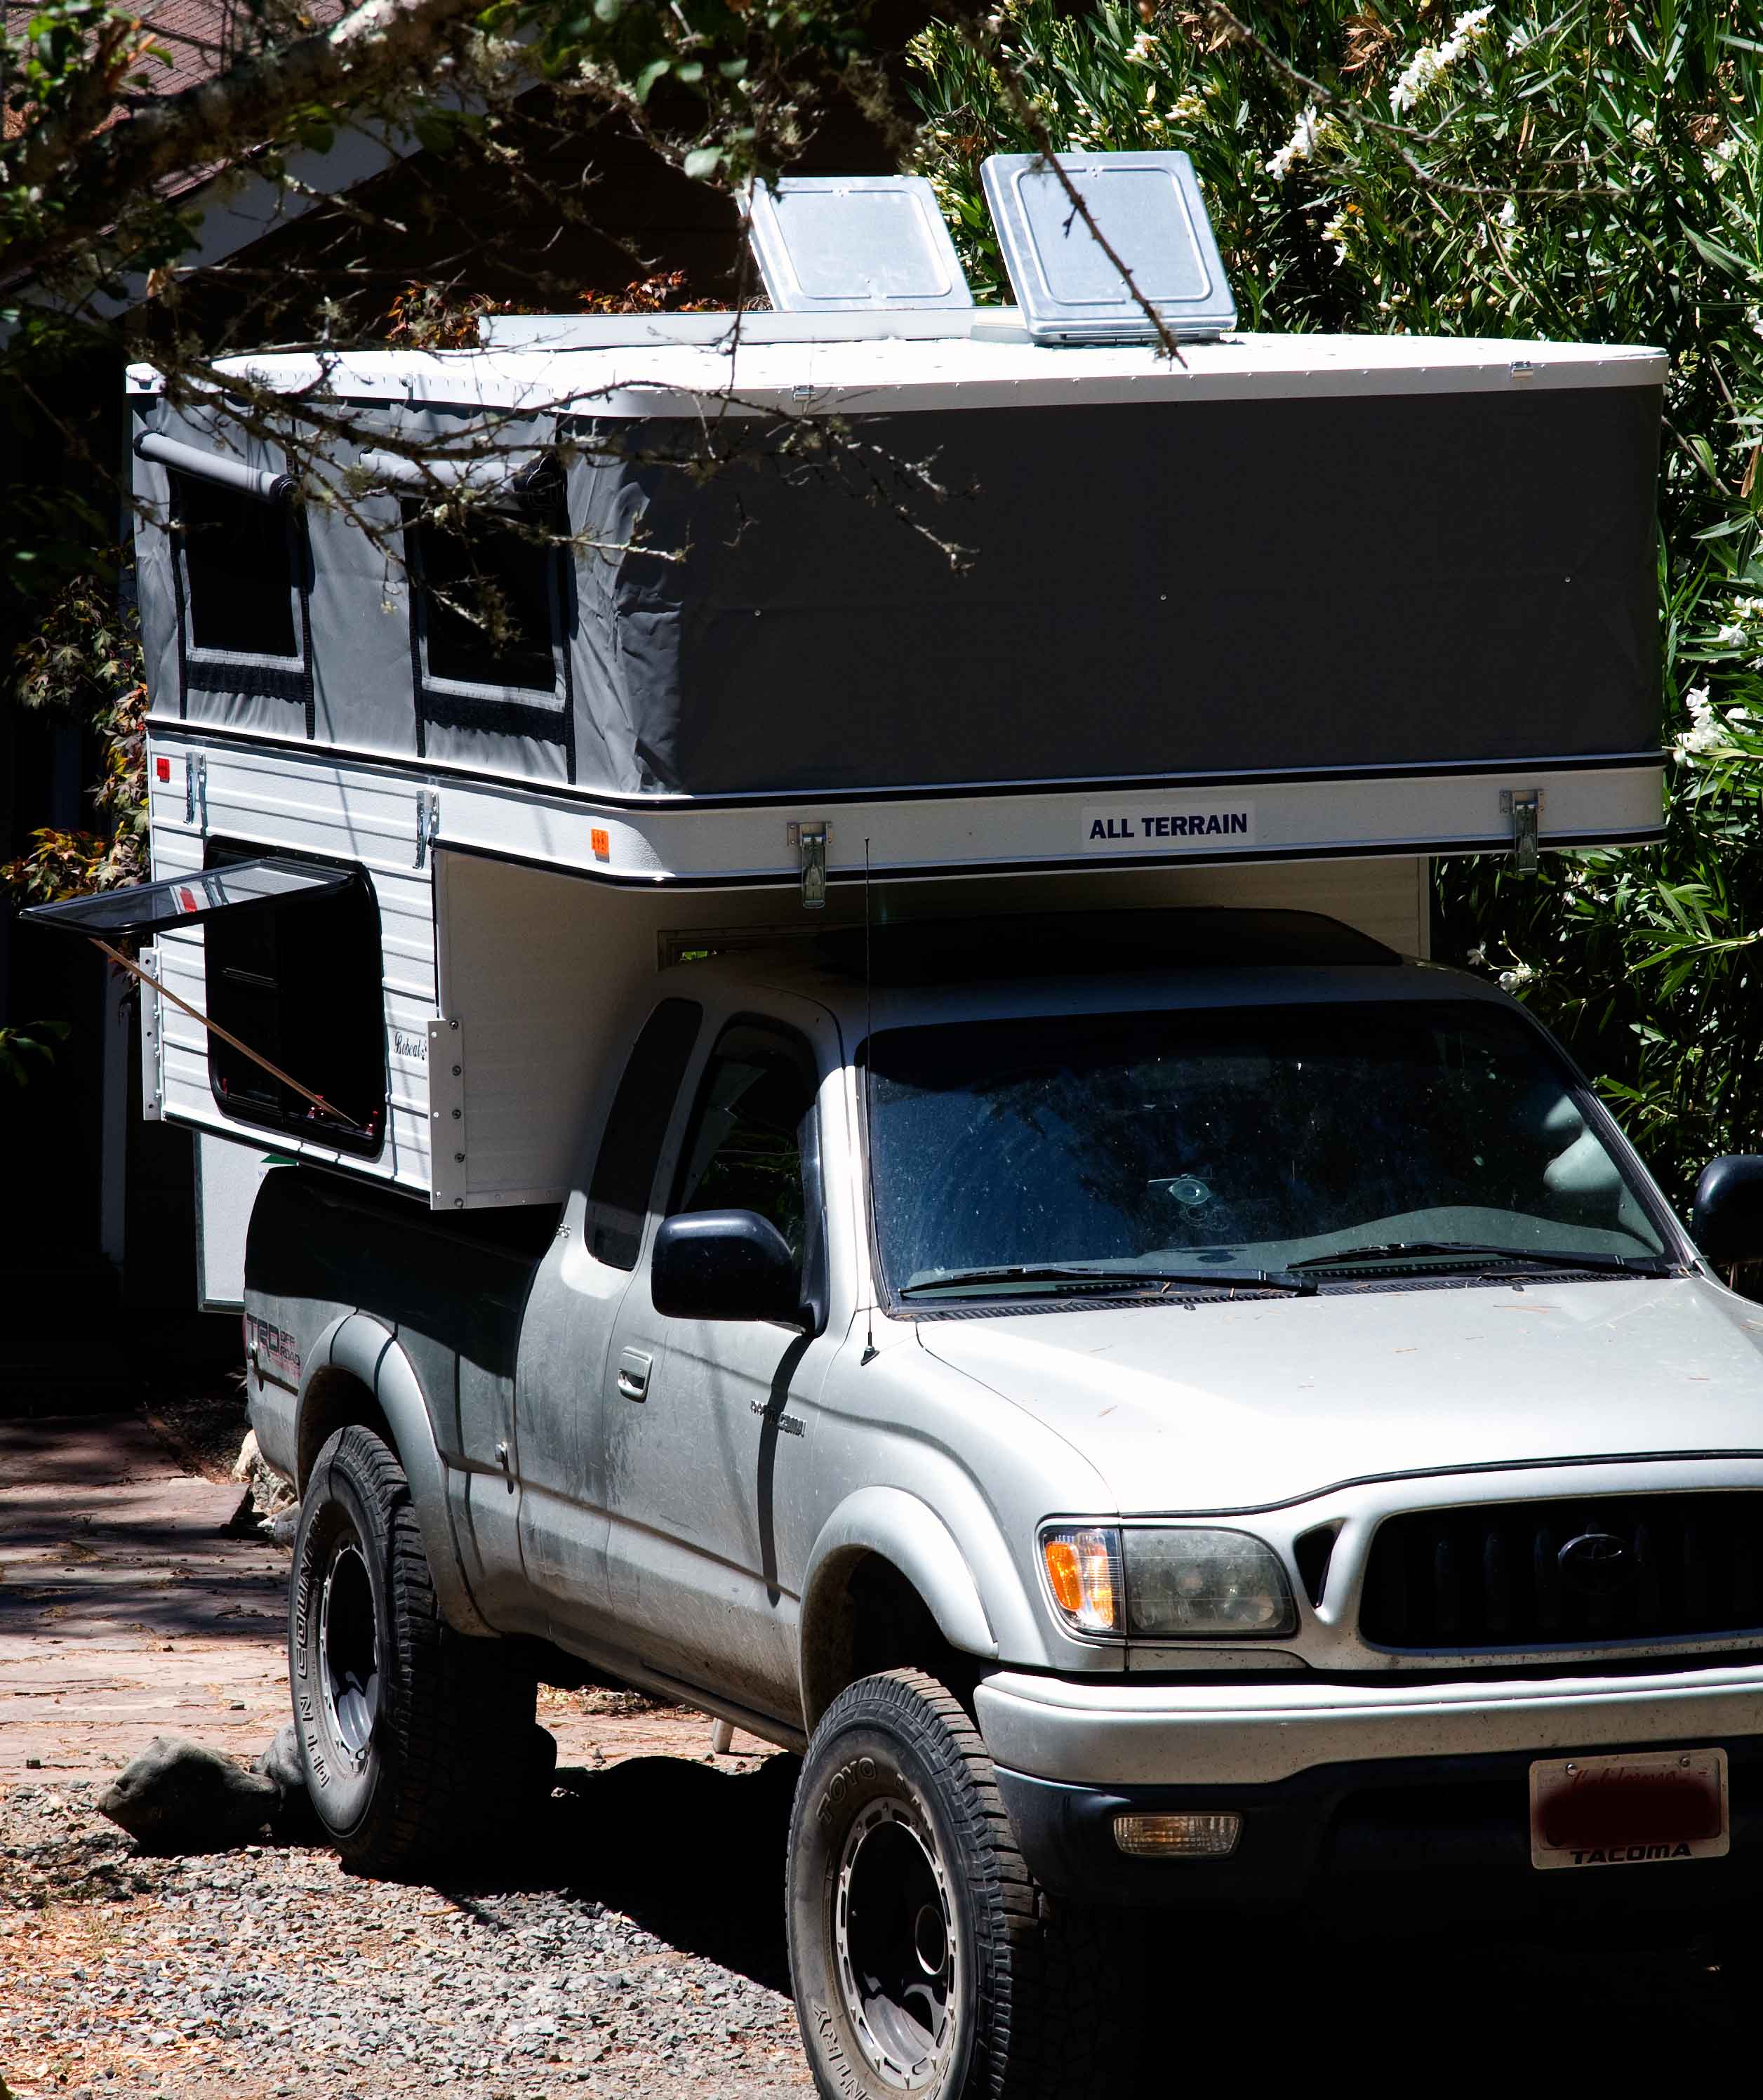 For Sale-2010 ATC Bobcat-Like new - Gear Exchange - Wander the West All Terrain Camper Bobcat For Sale